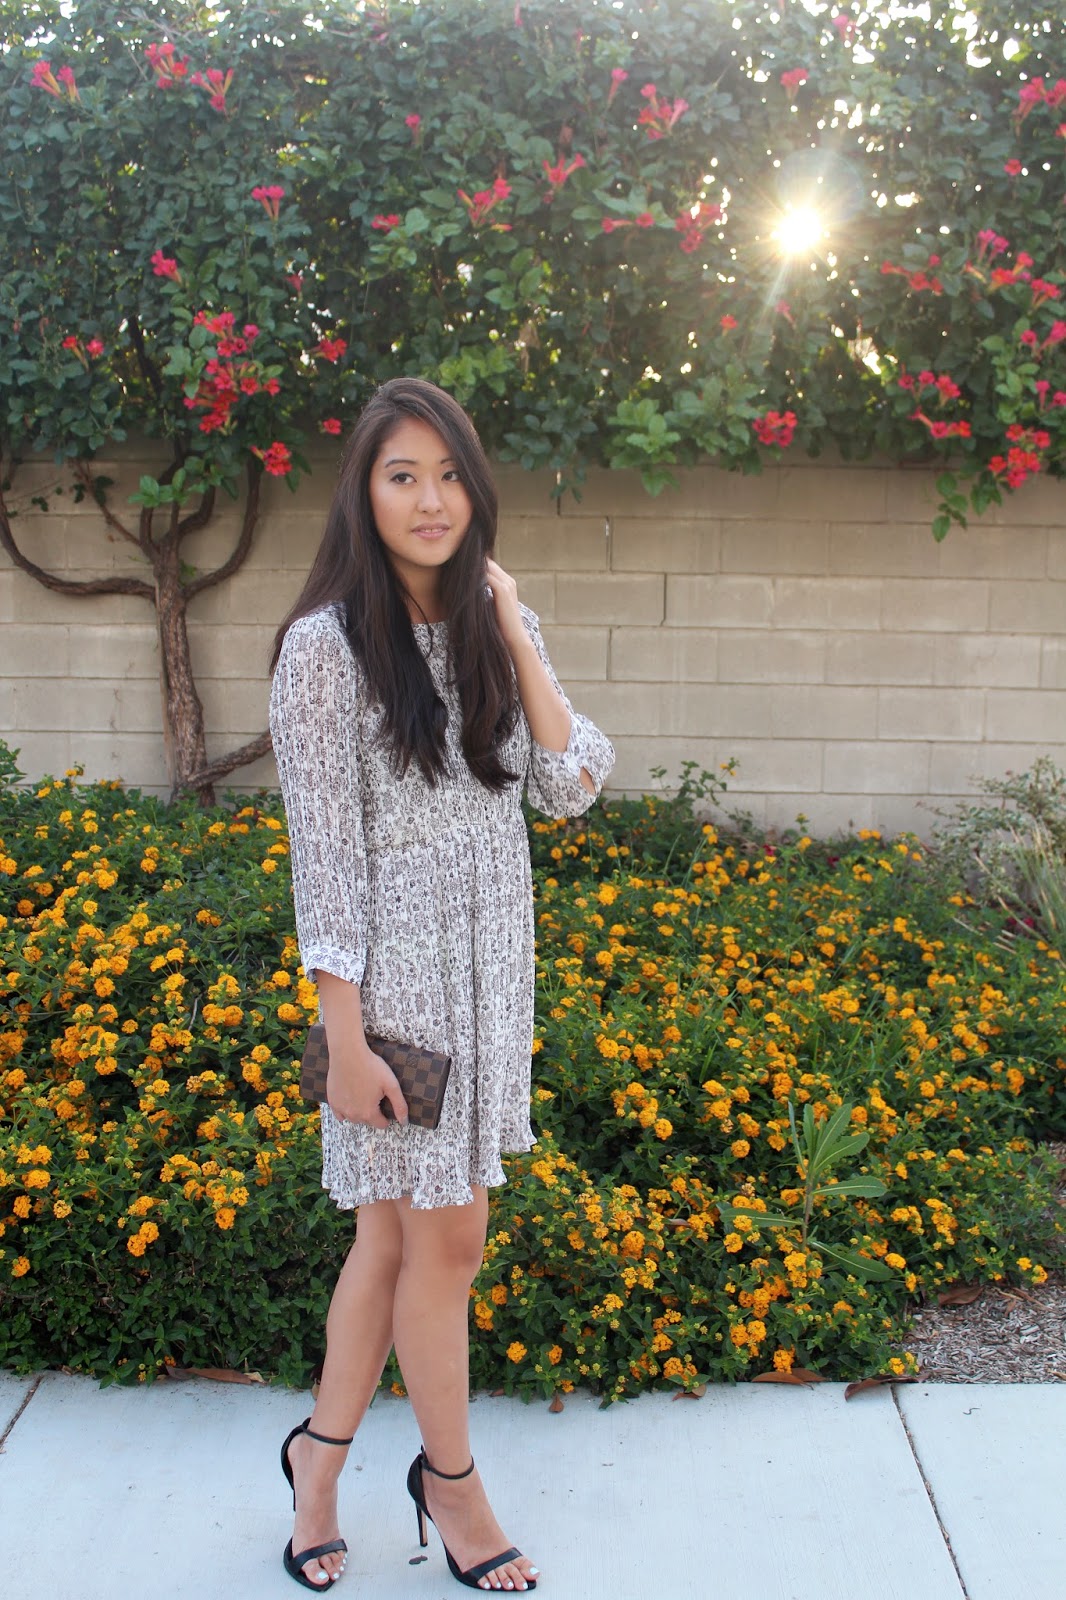 Young, Casual, Chic: Floral Dress and Strappy Sandals